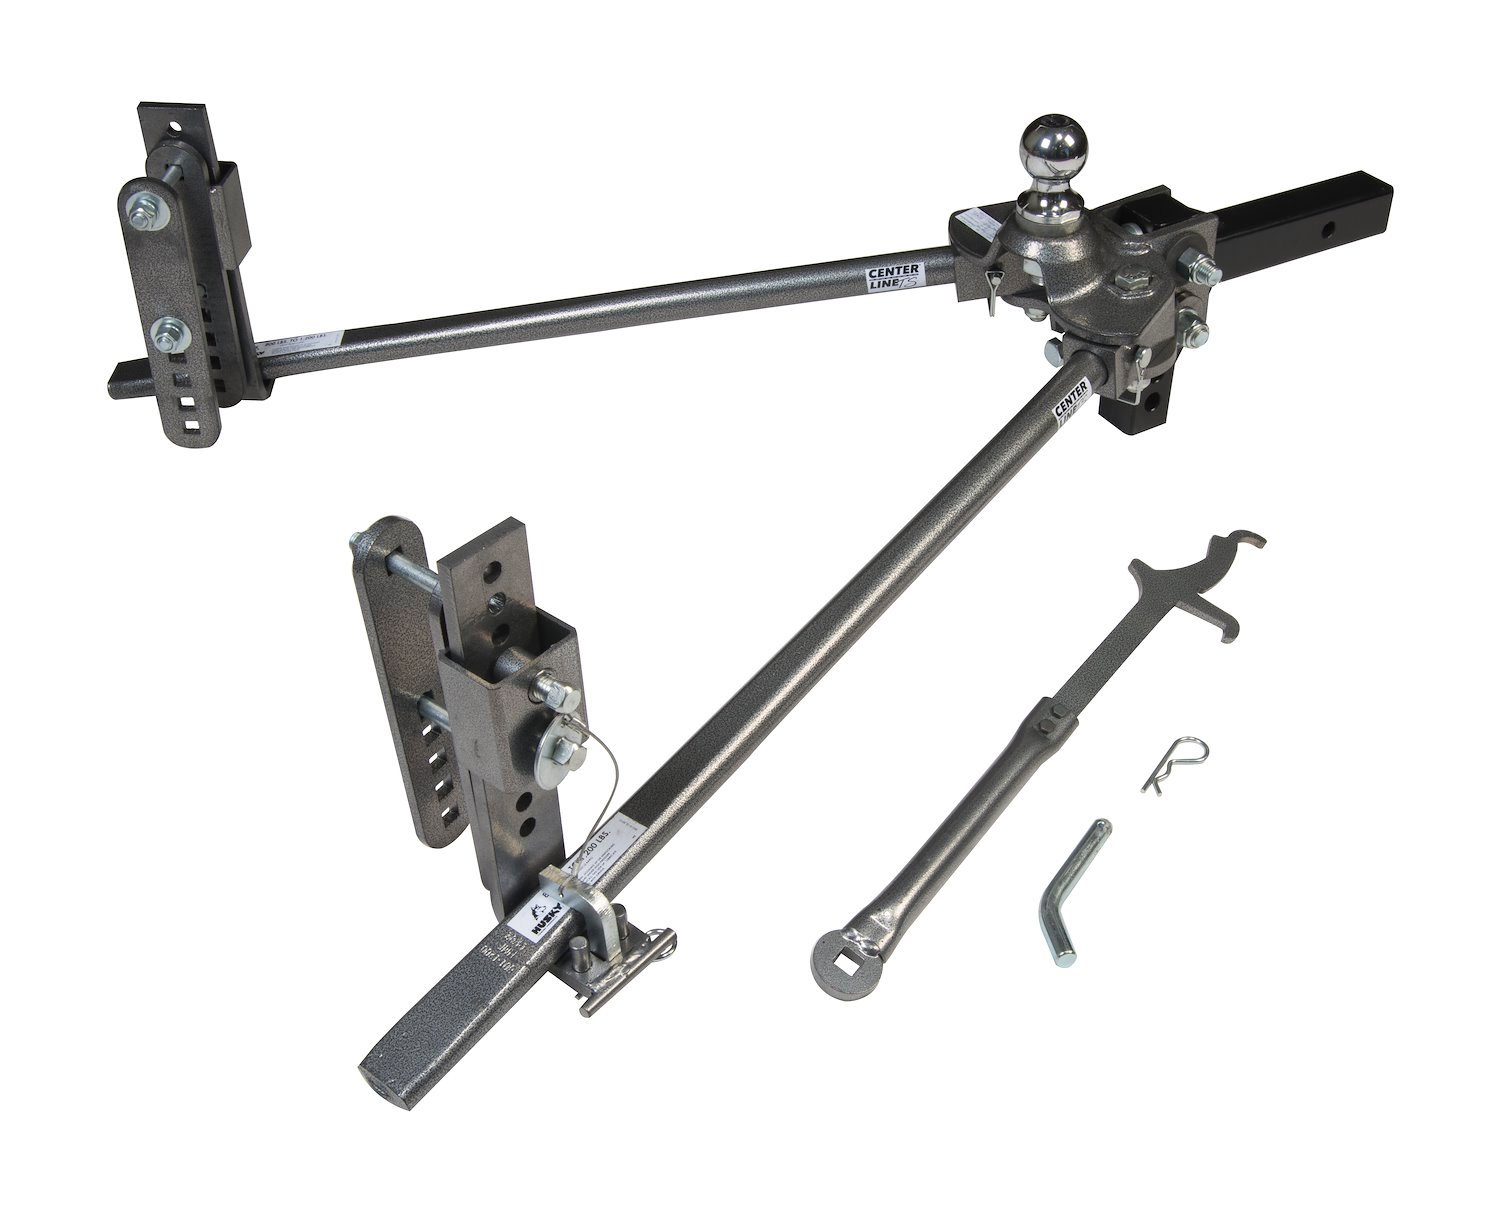 32217 Center Line TS Weight Distribution Hitch with 2-5/16 in. Ball - 8,000lbs, Black